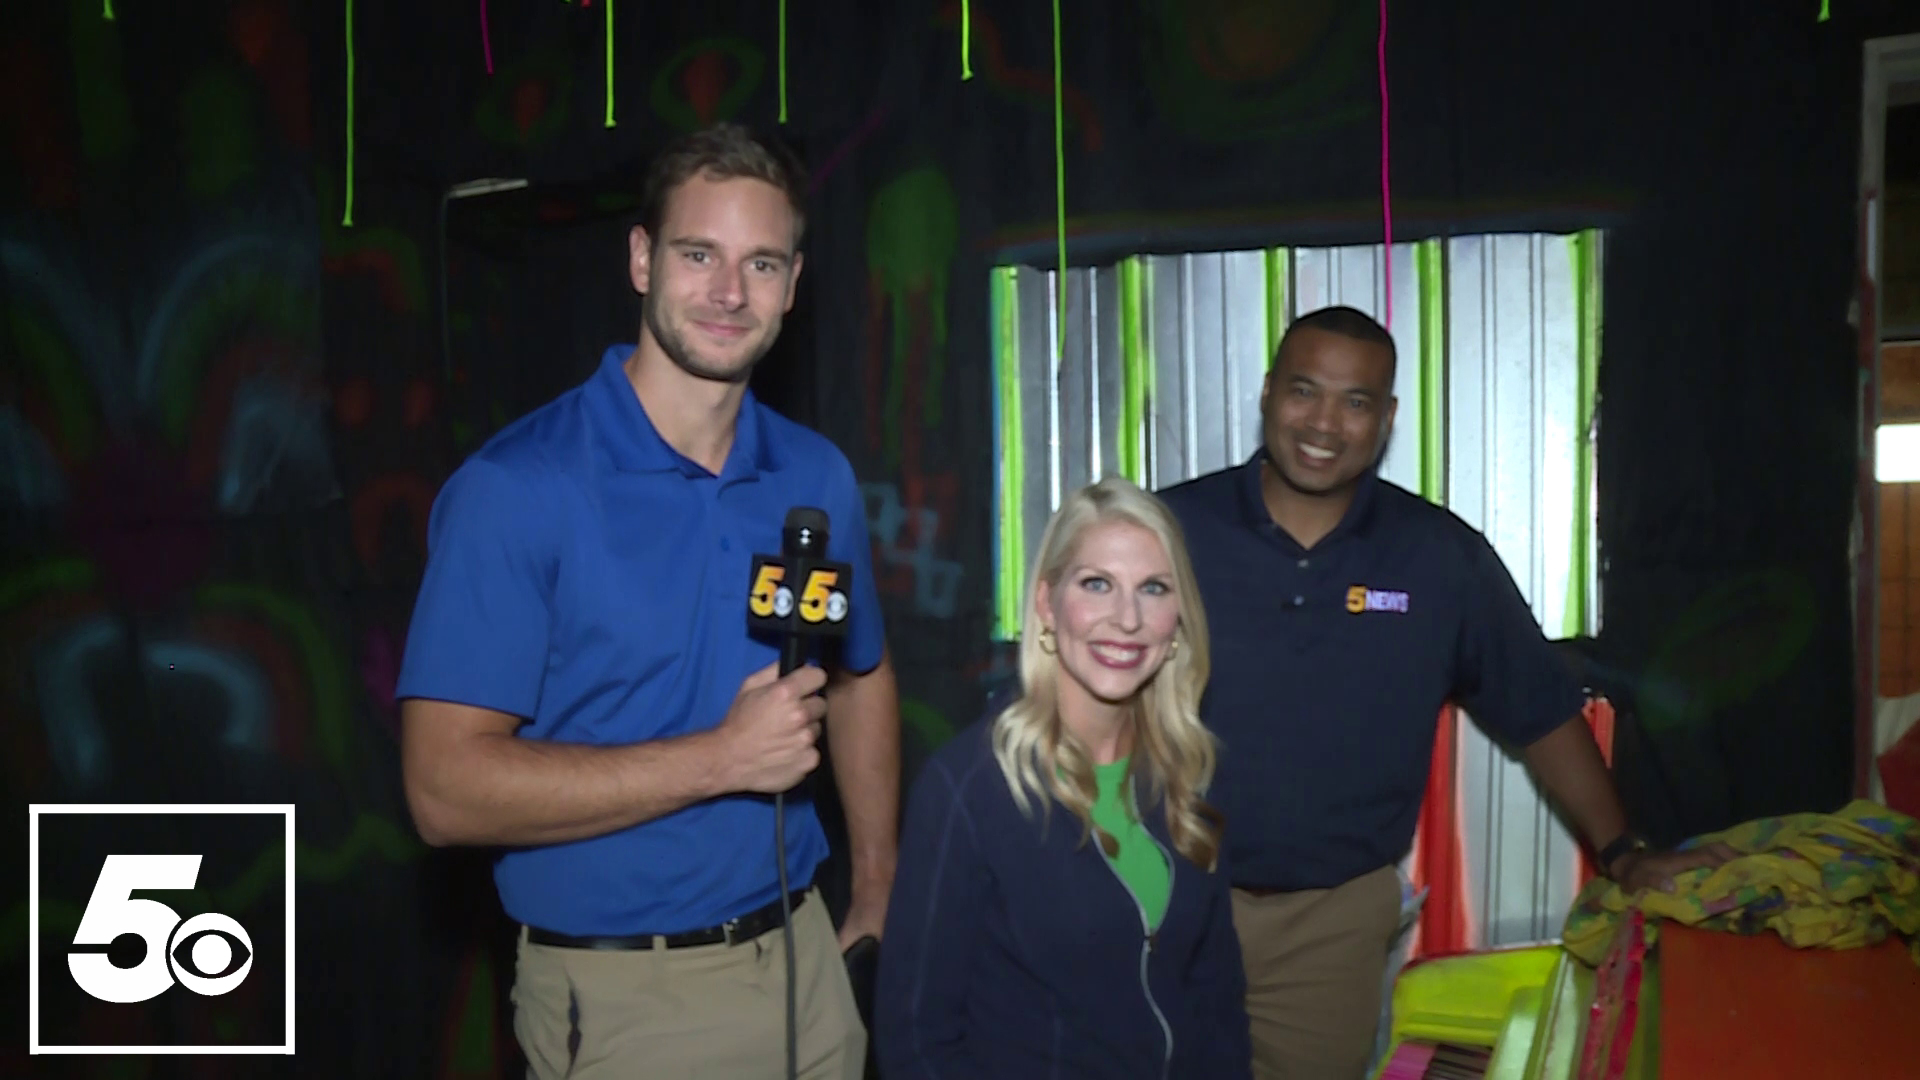 Don't miss this spooky start to your day with the 5NEWS Morning Team Laura, Ruben & Tyler.